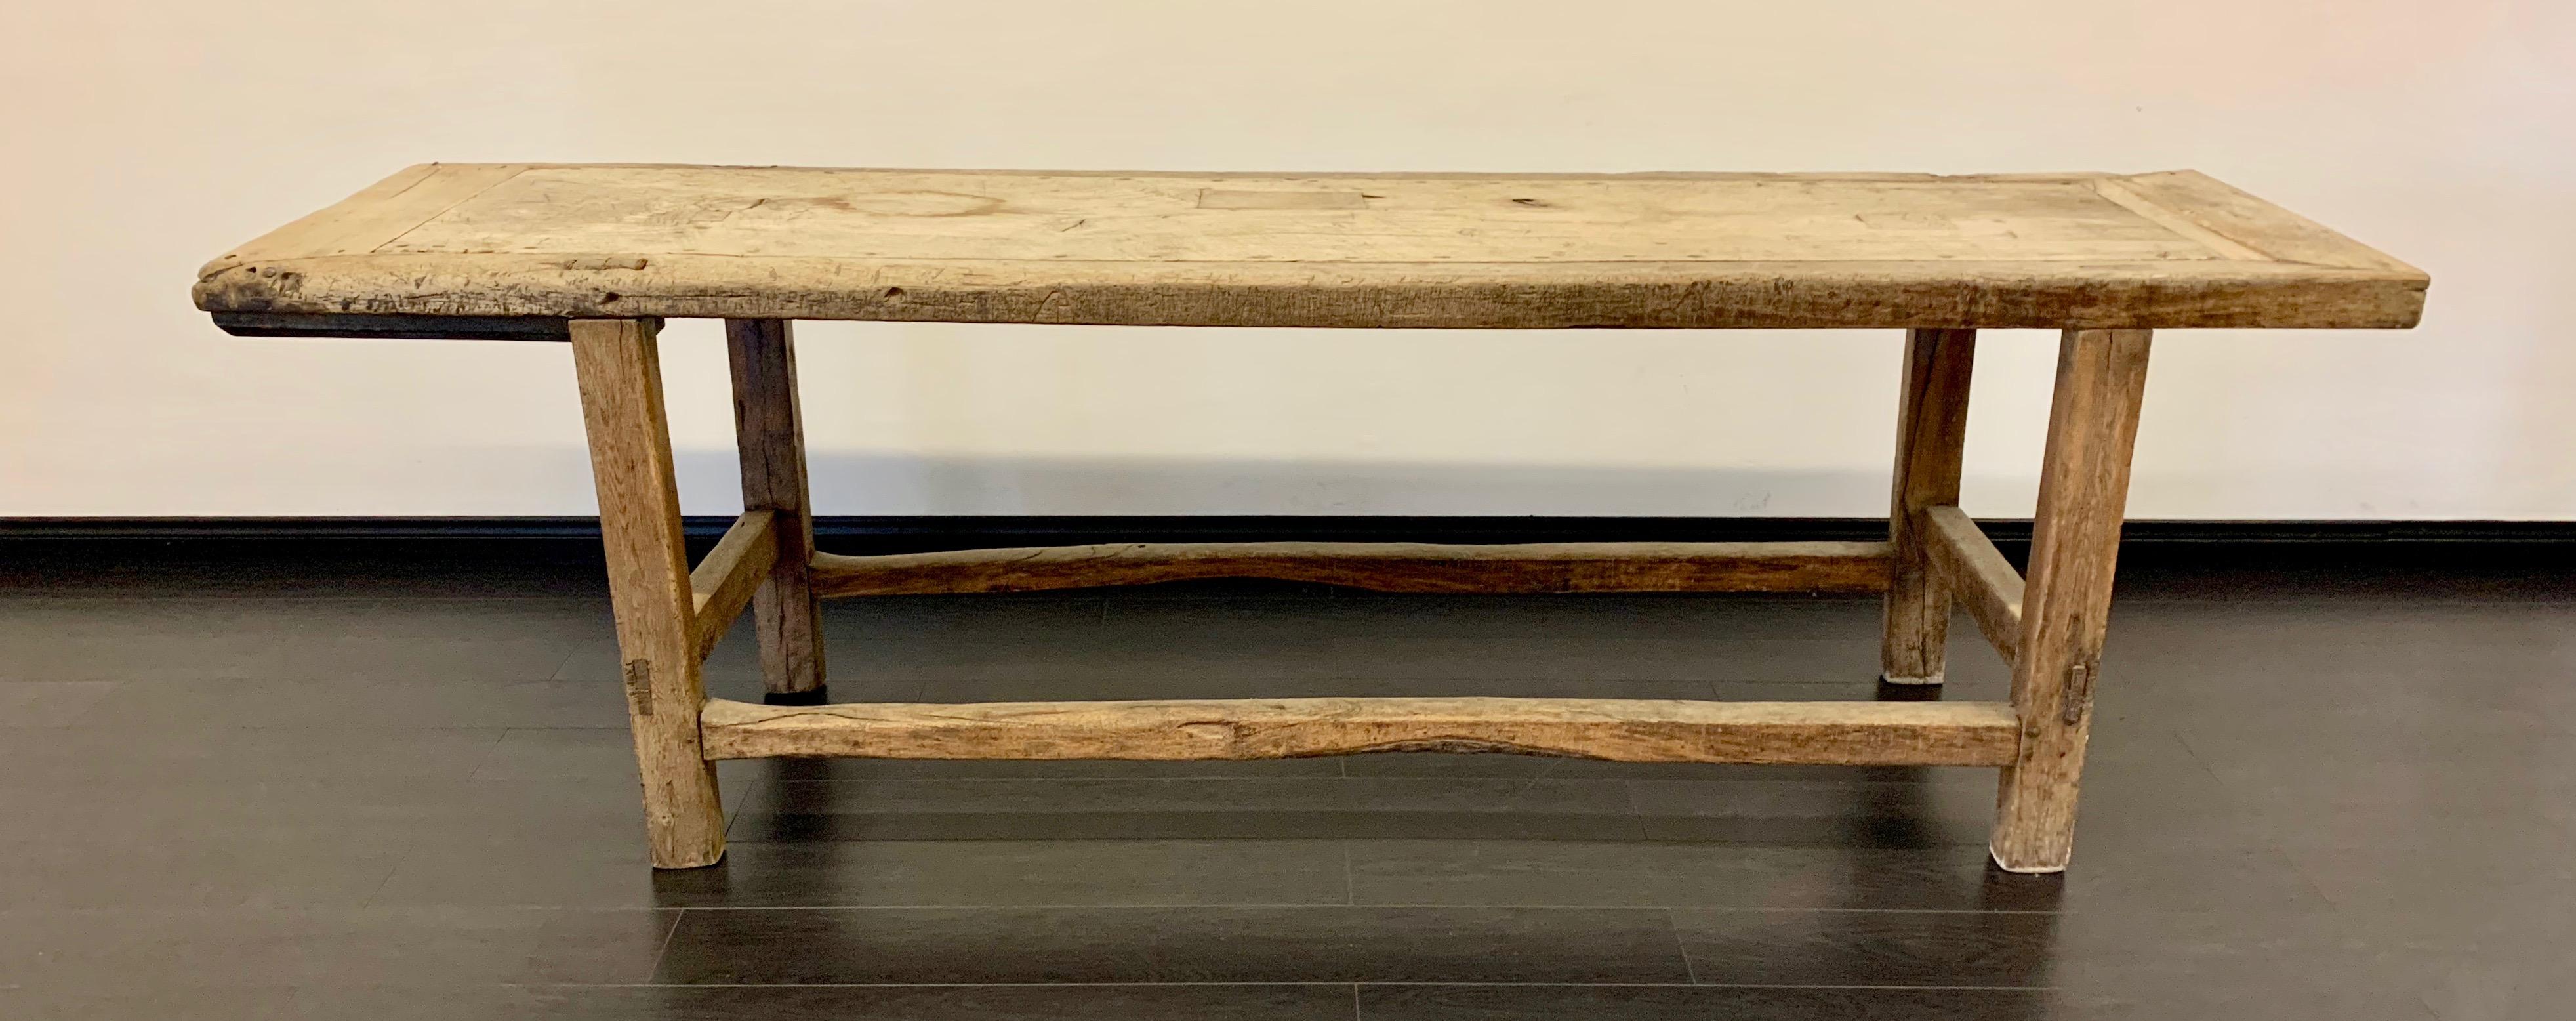 Organic Farm or Work Table from 18th Century, France For Sale 8